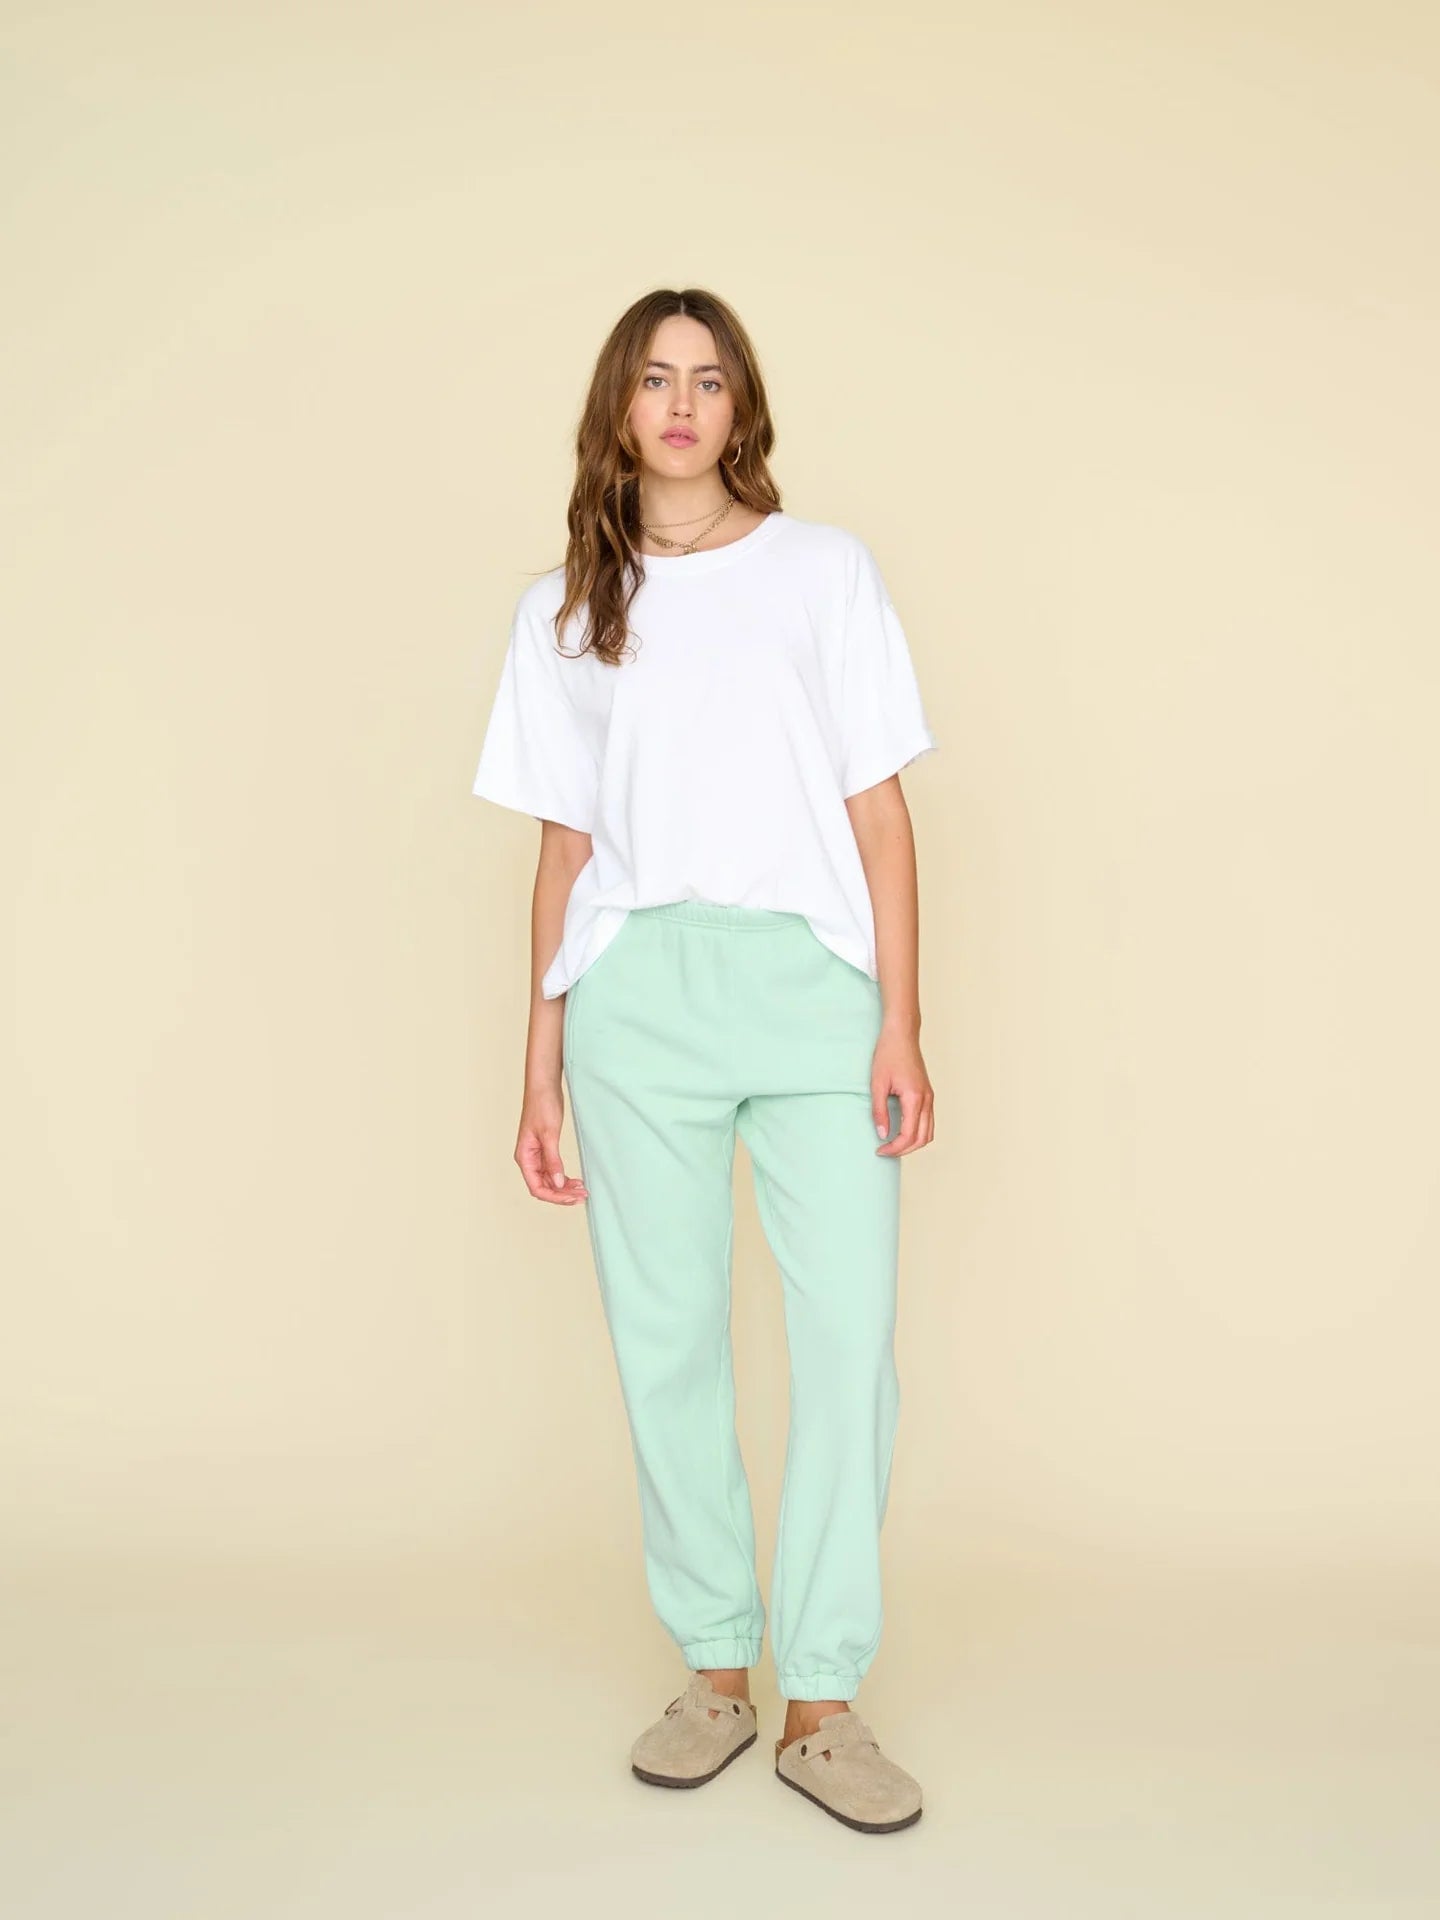 The Cropped Sweatpant in Glacier Blue